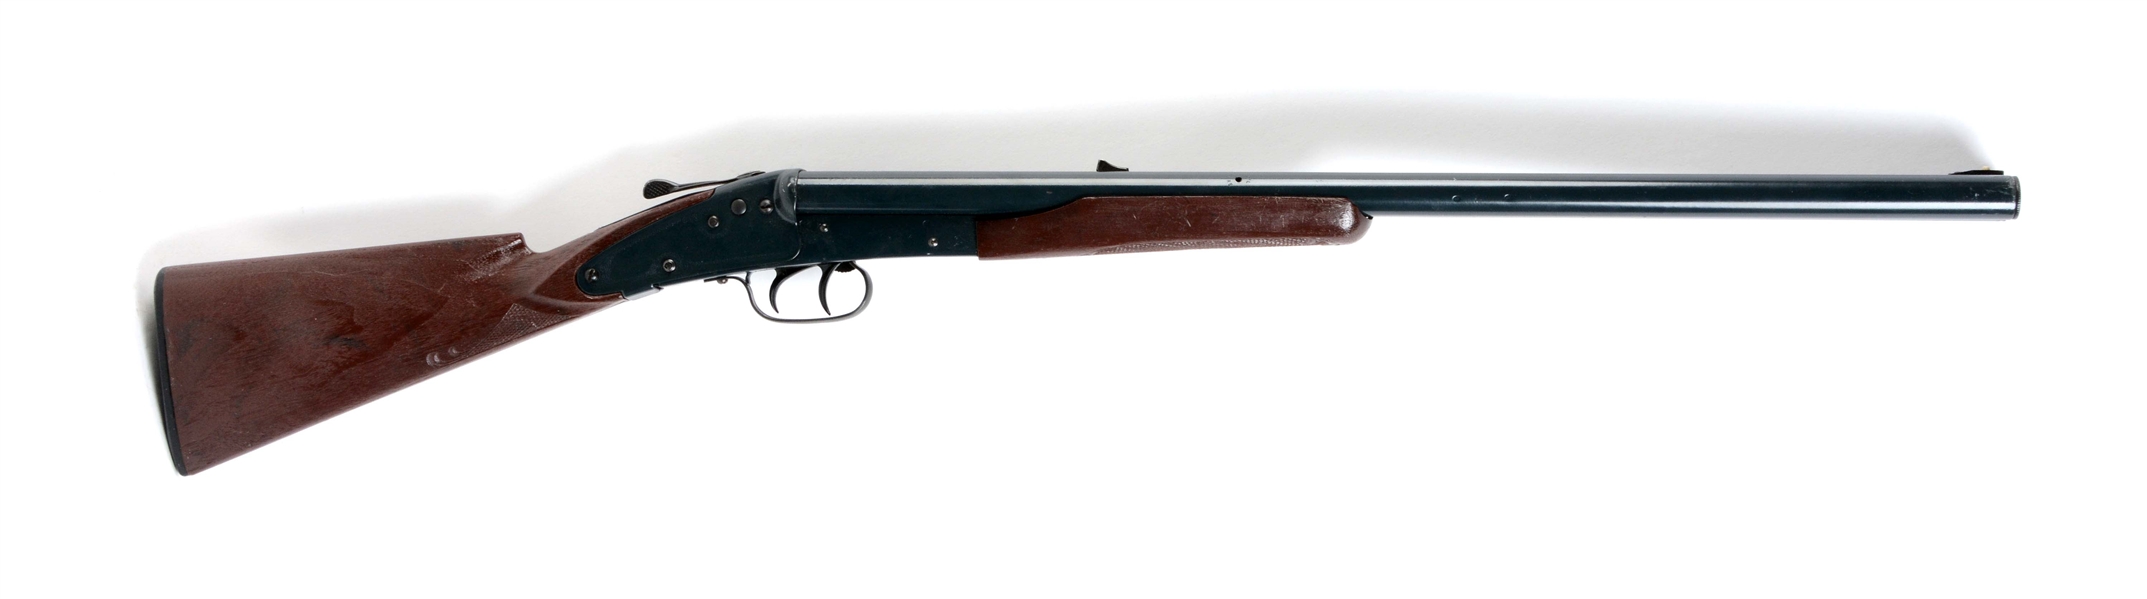 DAISY MODEL 21 SIDE BY SIDE AIR RIFLE.